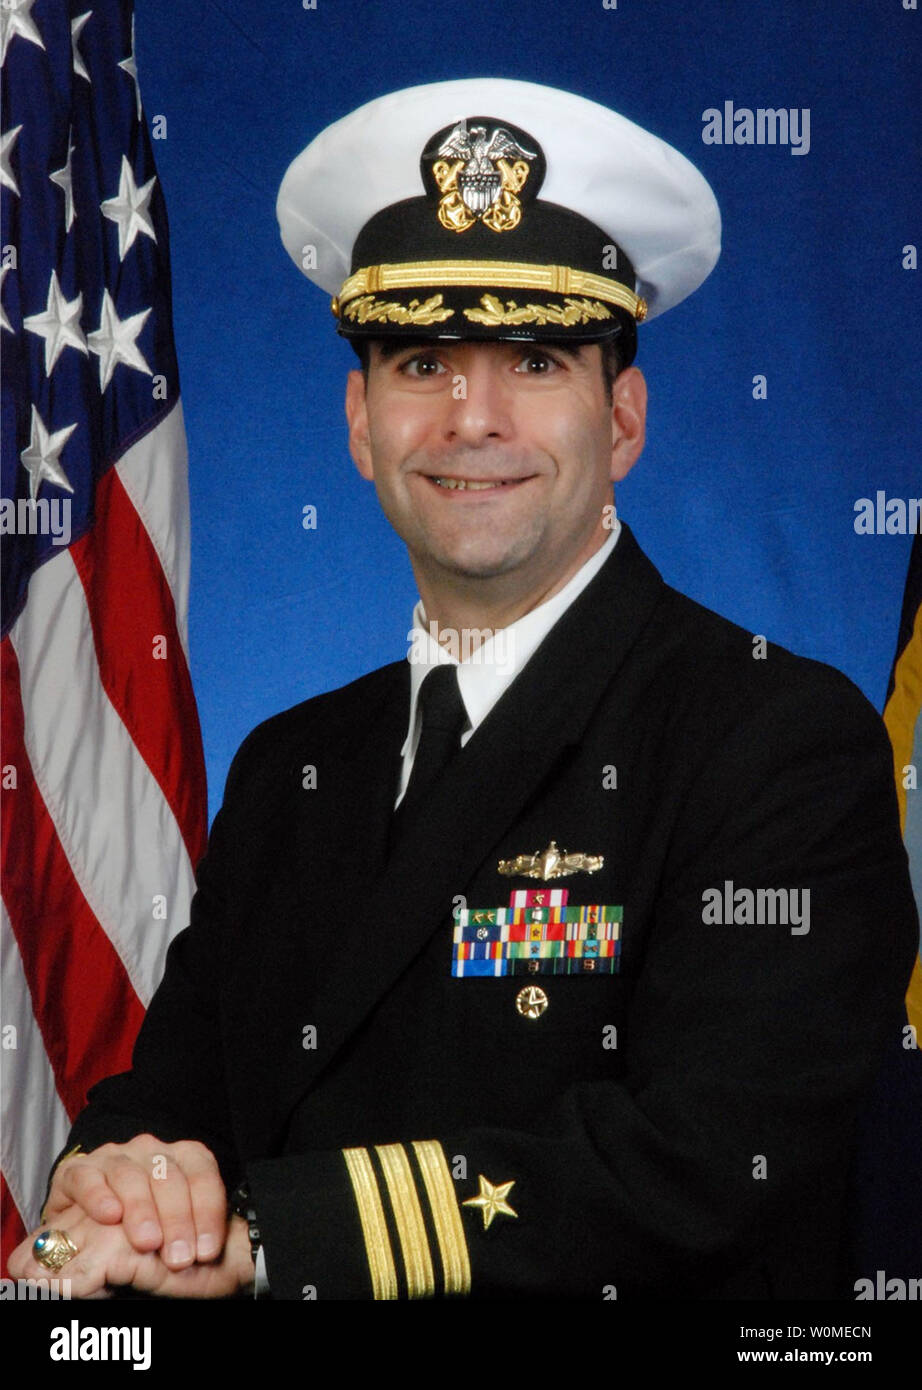 This undated file photo provided by the U.S. Navy on April 13, 2009, shows Cmdr. Frank X. Castellano, commanding officer of the guided-missile destroyer USS Bainbridge. US Navy SEALs shot dead three pirates holding Captain Richard Phillips of the cargo ship Maersk Alabama when they felt he was in imminent danger as the pirates pointed an AK-47 rifle at him off the coast of Somalia on April 12, 2009.    (UPI Photo/U.S. Navy Photo) Stock Photo